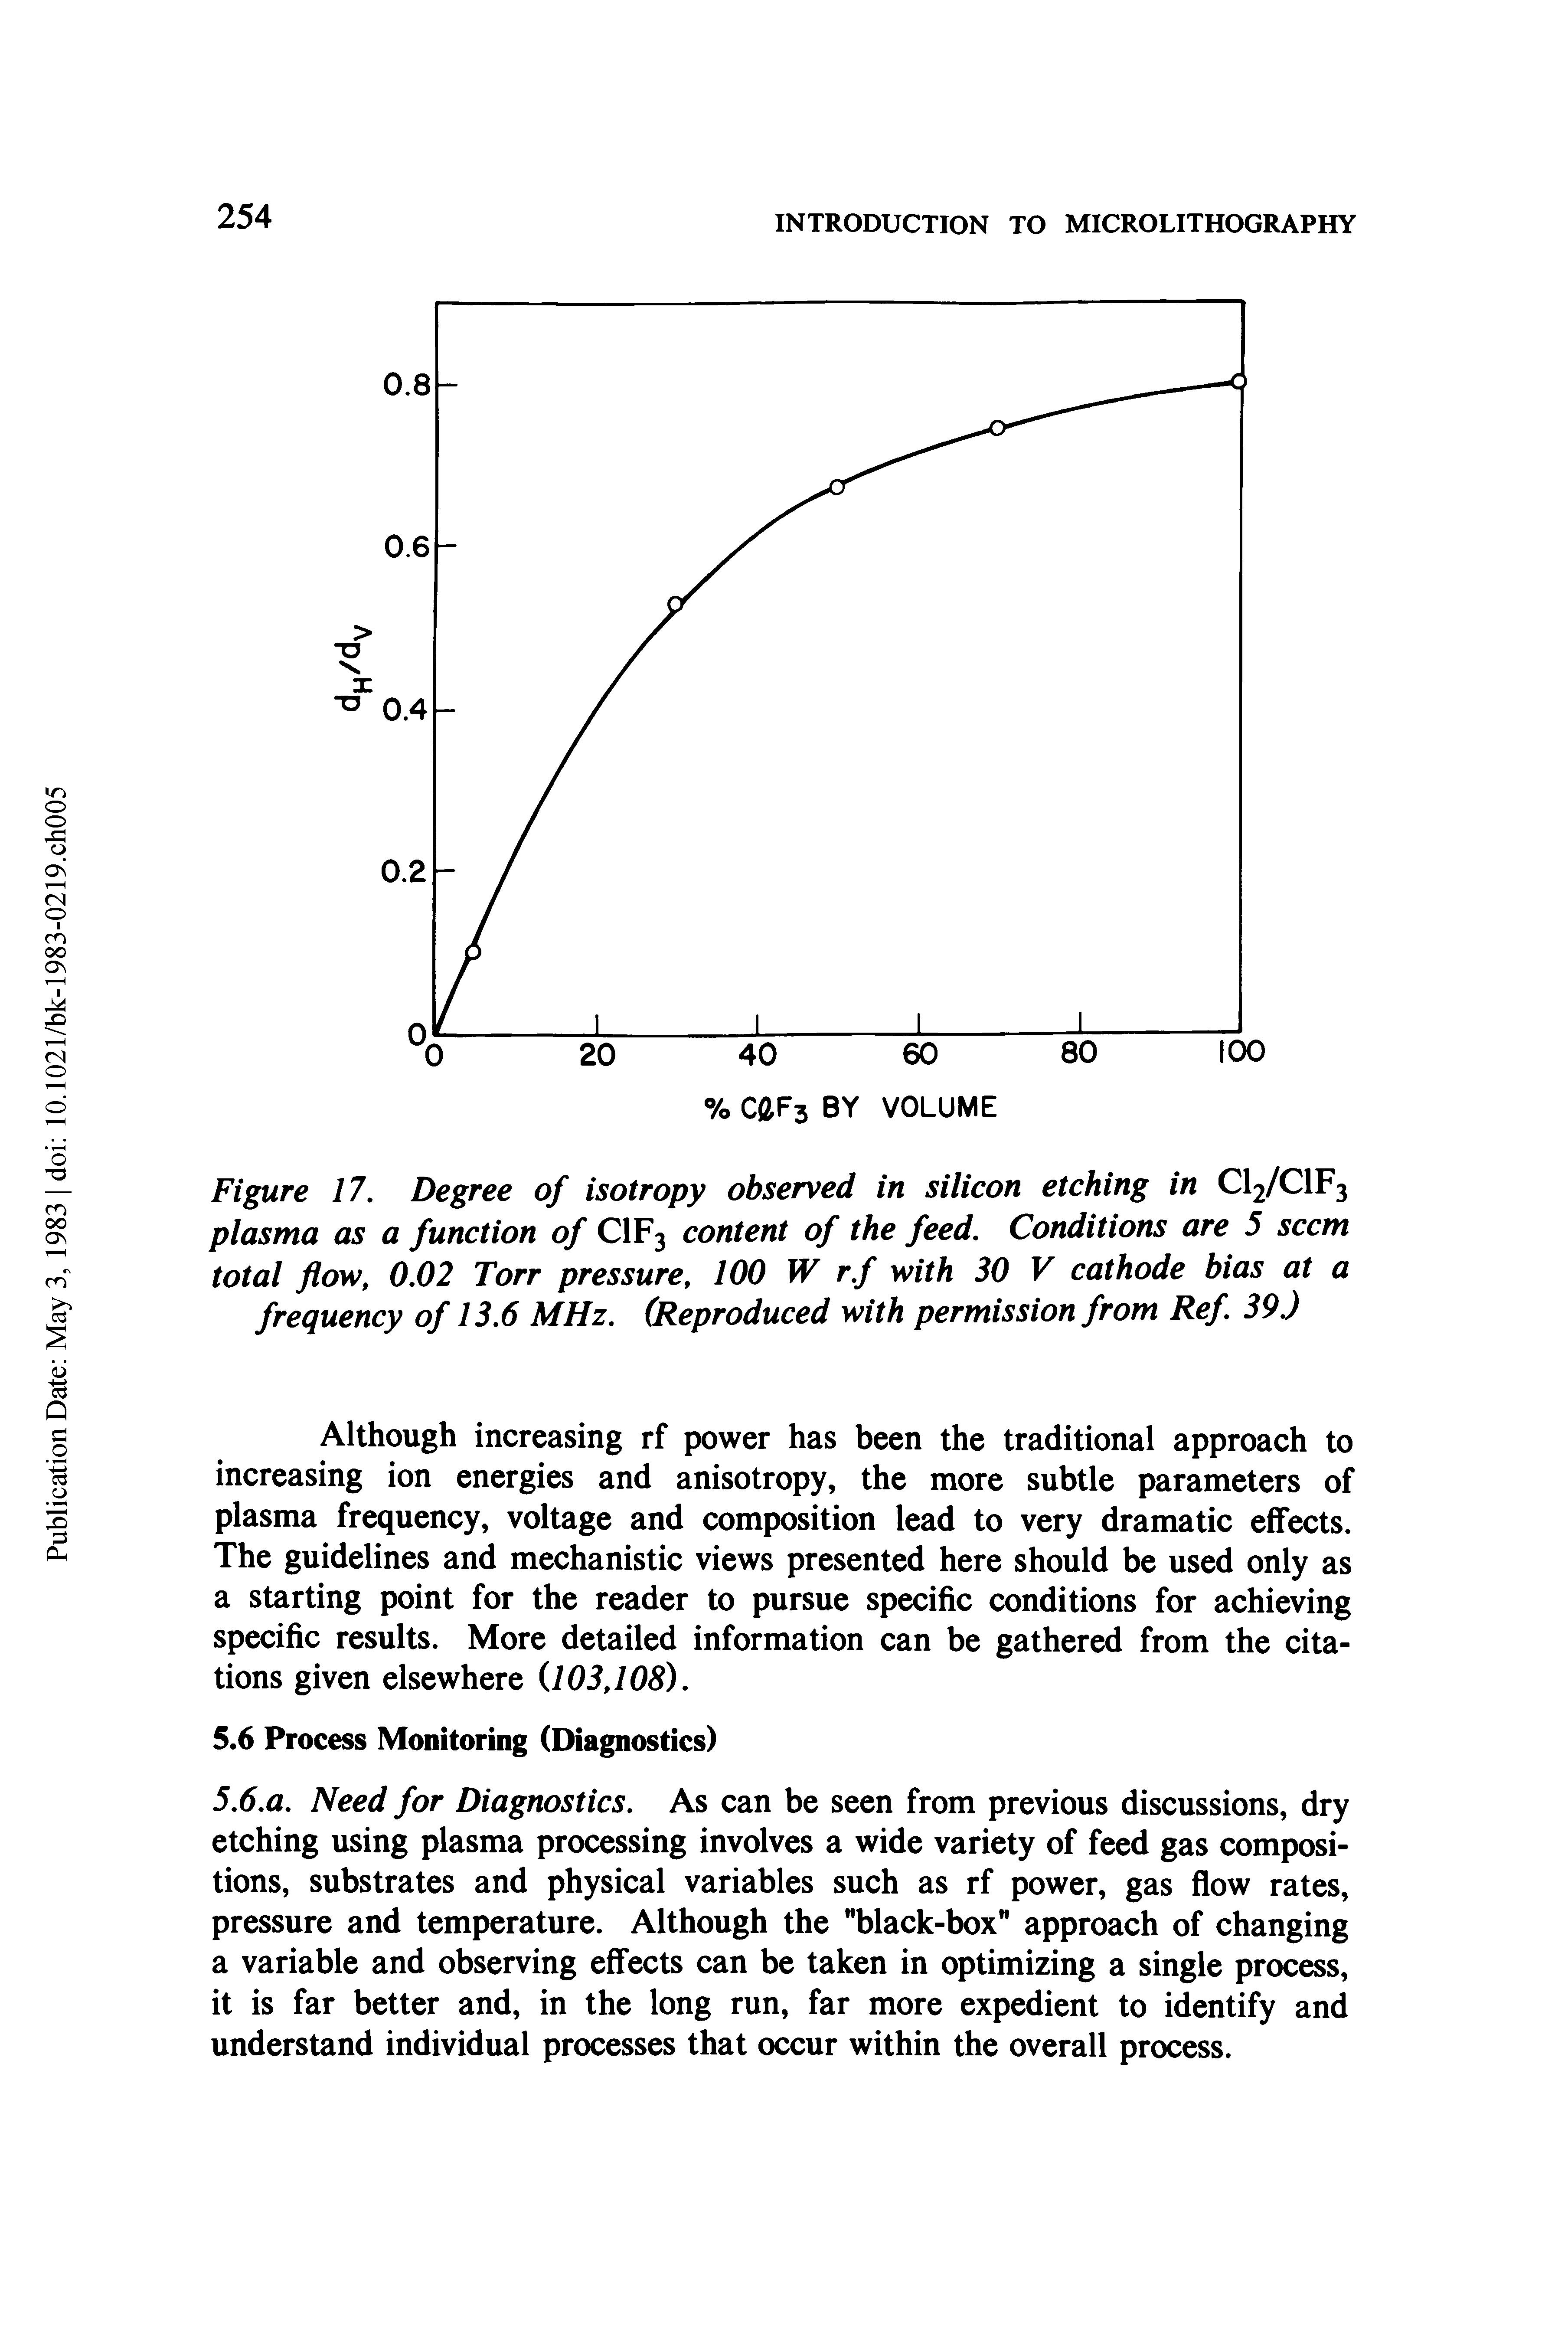 Figure 17. Degree of isotropy observed in silicon etching in CI2/CIF3 plasma as a function of CIF3 content of the feed. Conditions are 5 seem total flow, 0.02 Torr pressure, 100 W rf with 30 V cathode bias at a frequency of 13.6 MHz. (Reproduced with permission from Ref. 39J...